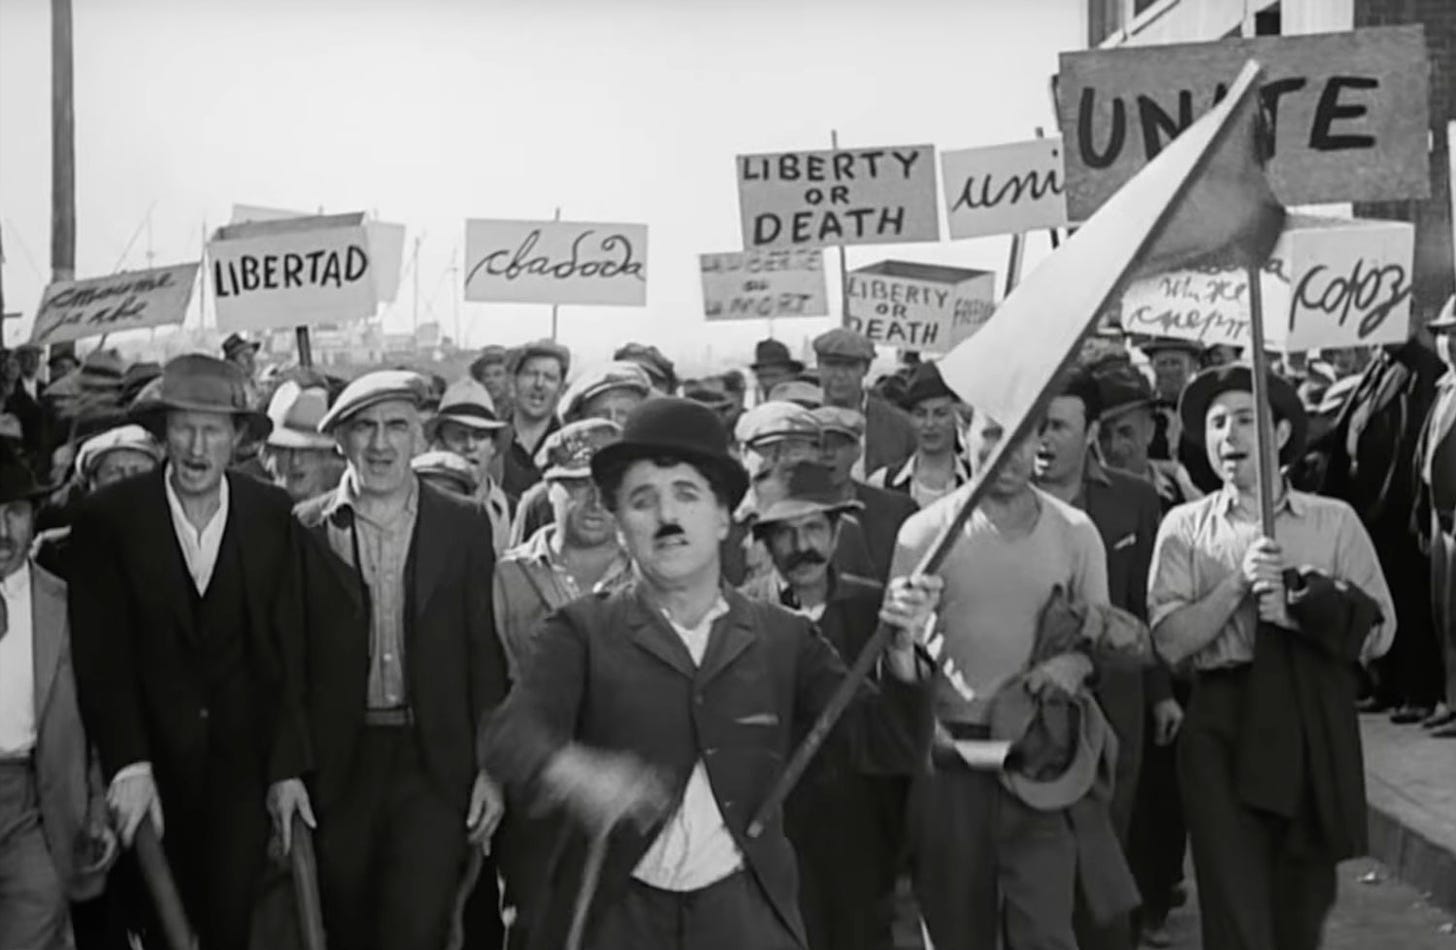 Charlie Chaplin as the tramp leads a workers' protest march in 1936 film Modern Times. He waves a red flag, others carry placards saying 'libertad', 'unity', 'freedom' and other terms